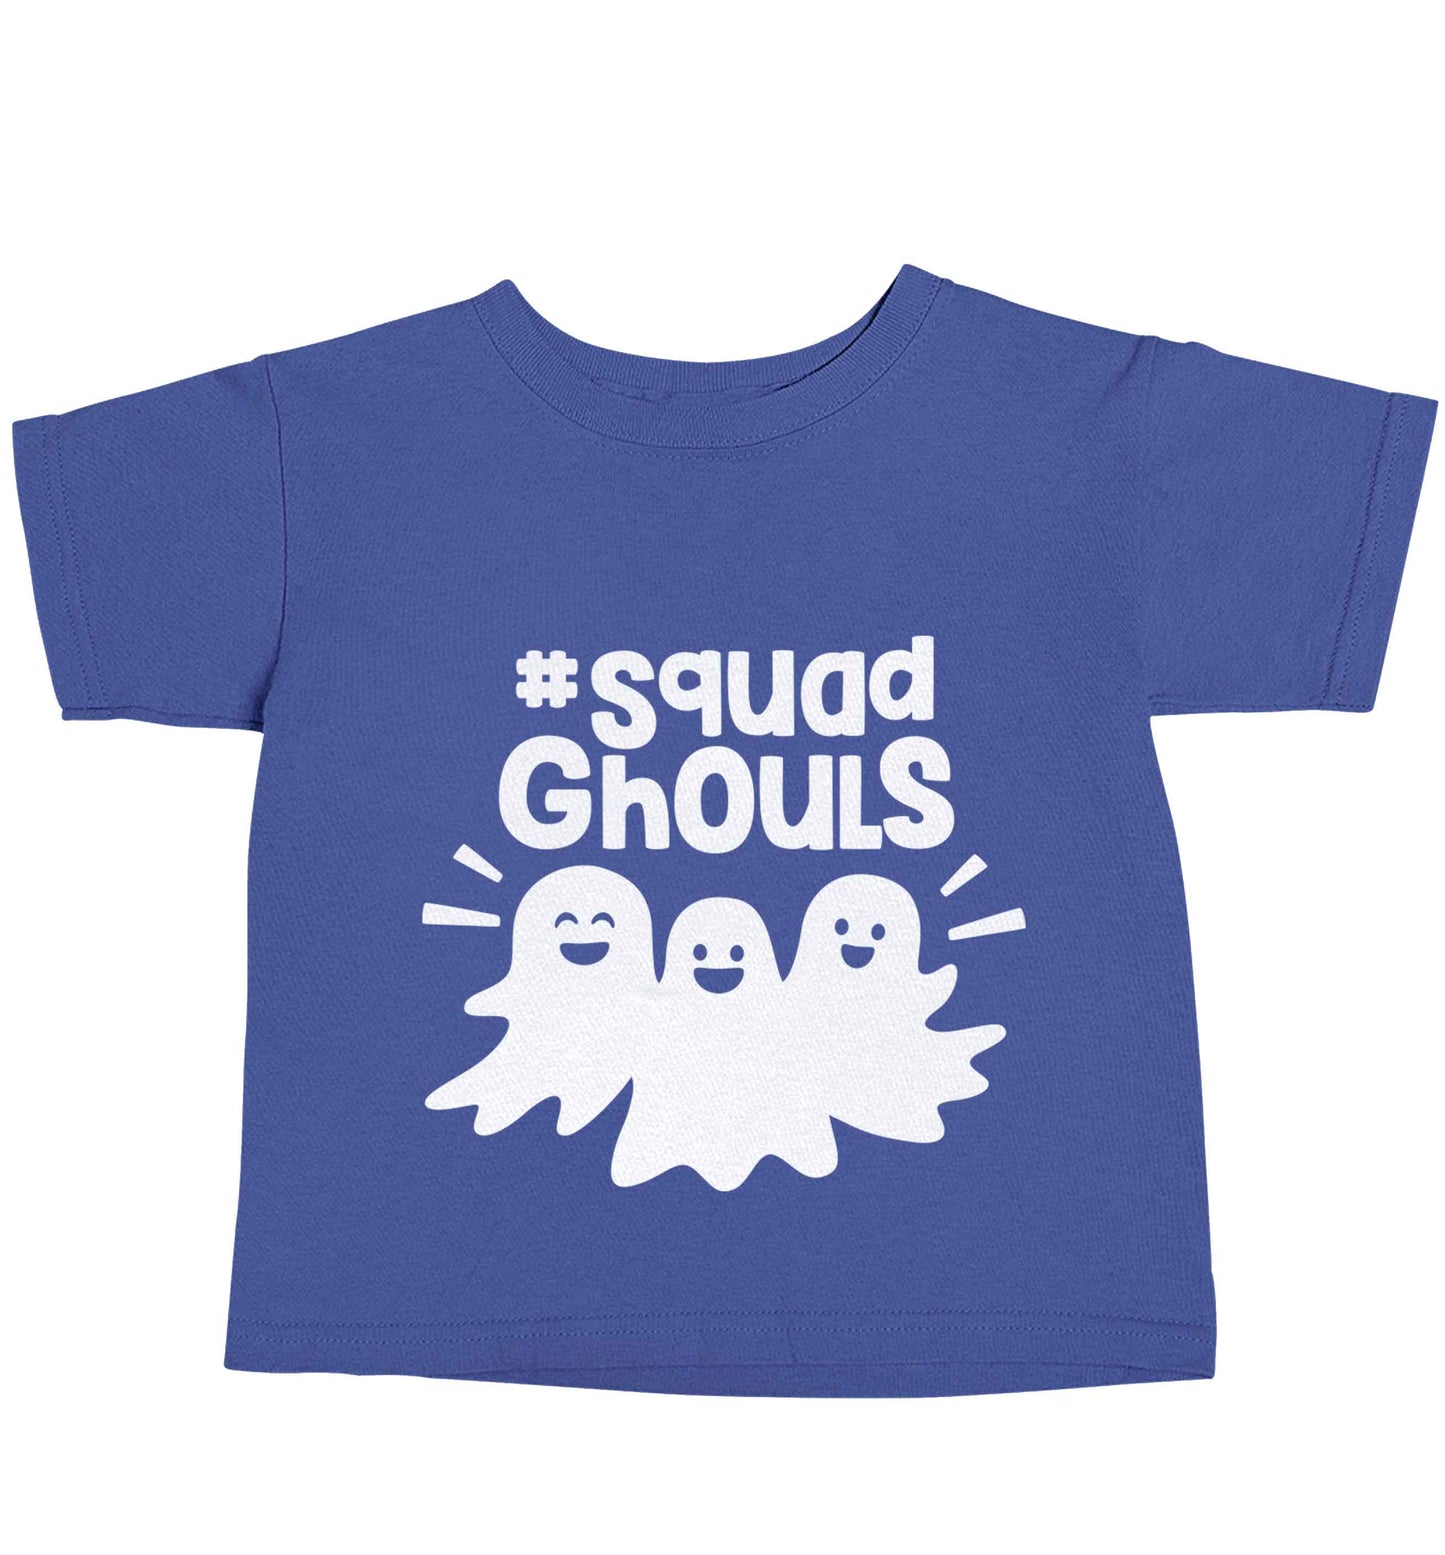 Squad ghouls Kit blue baby toddler Tshirt 2 Years